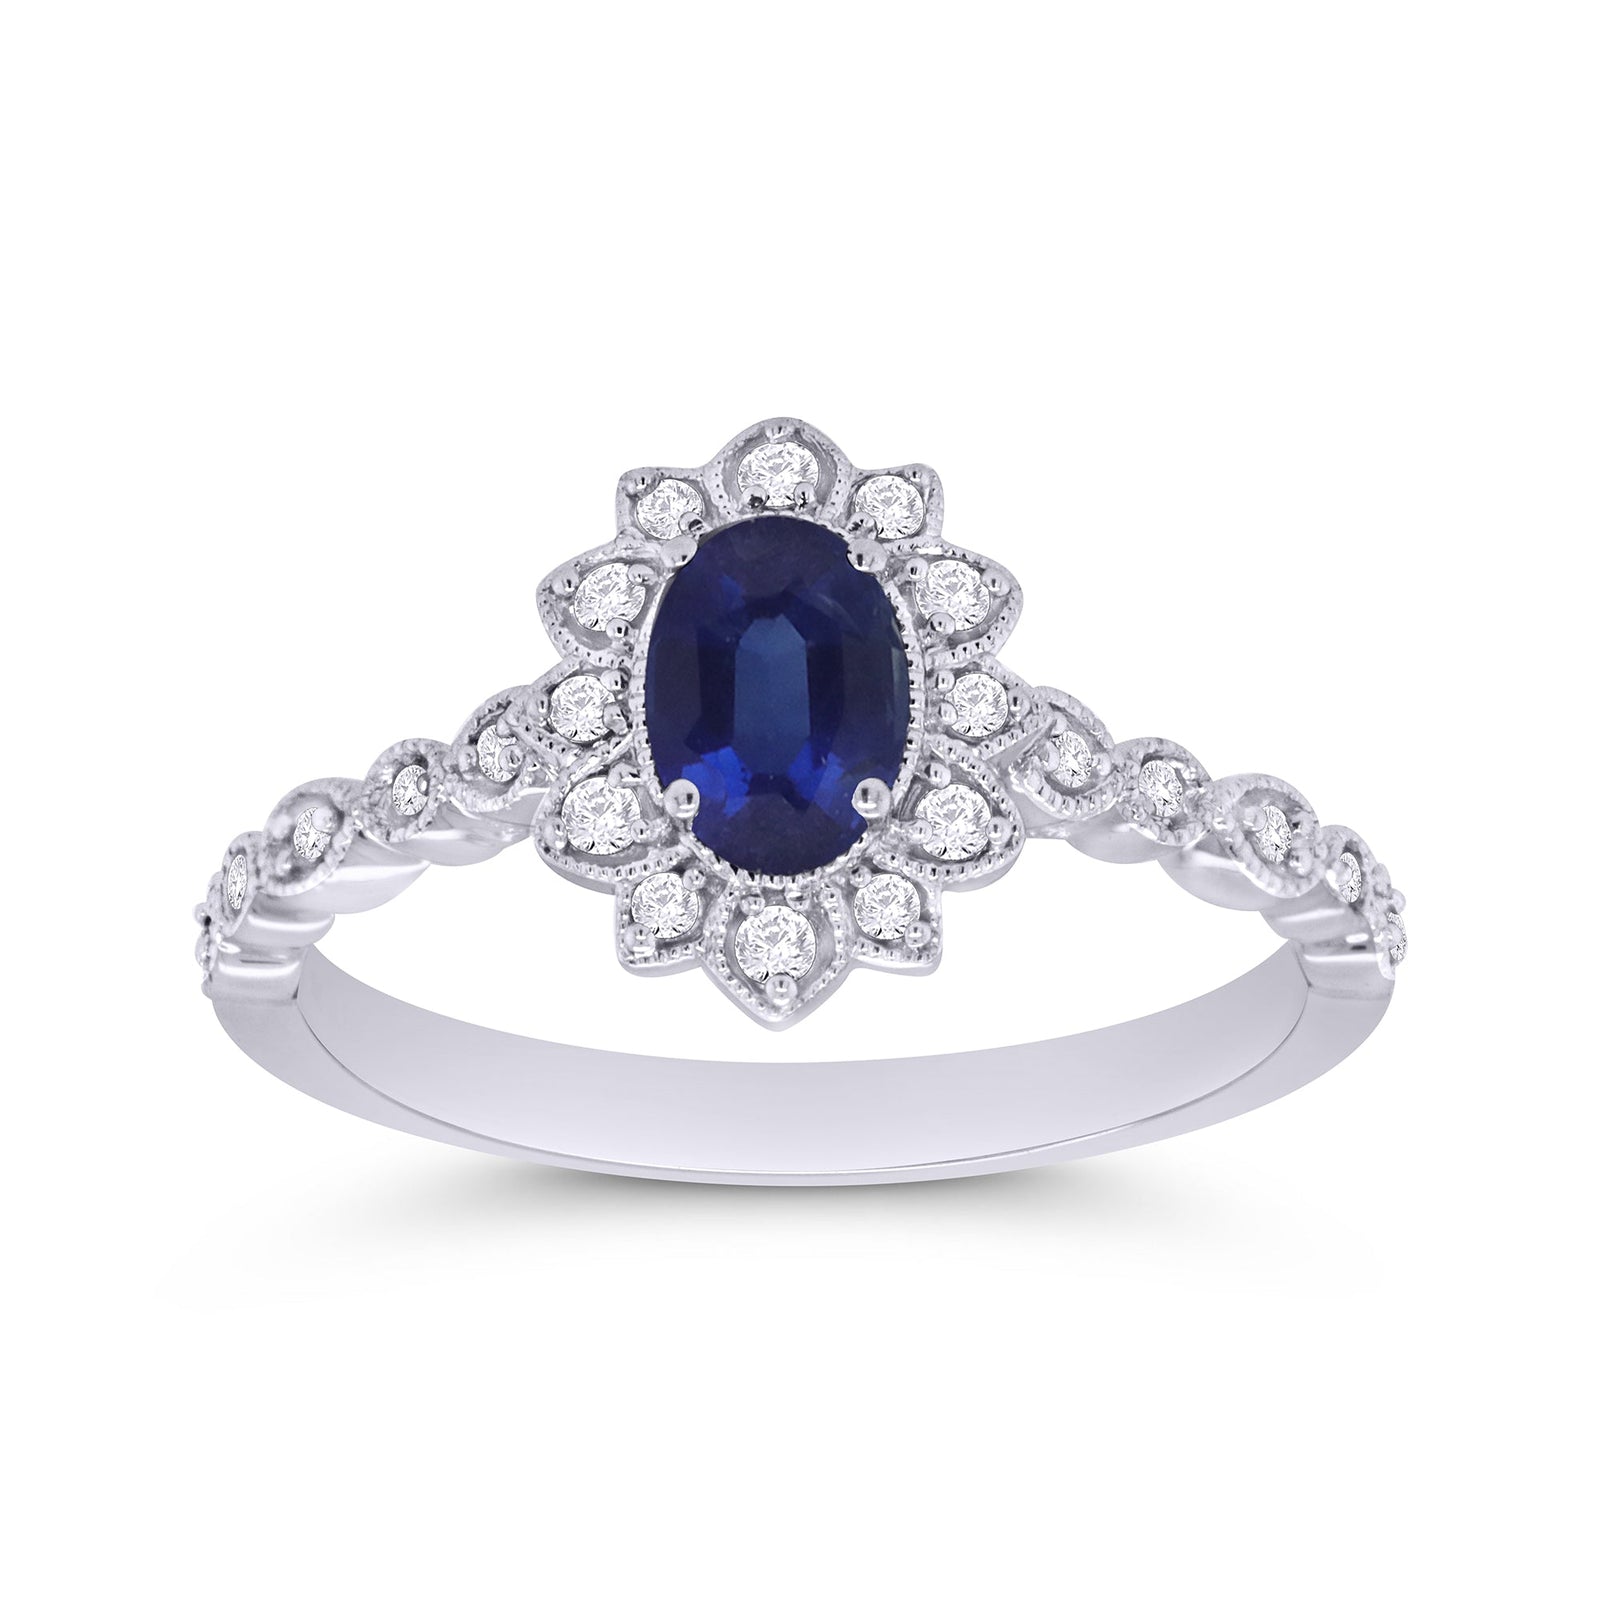 9ct white gold 6x4mm oval sapphire & diamond cluster ring with diamond set shoulders 0.15ct